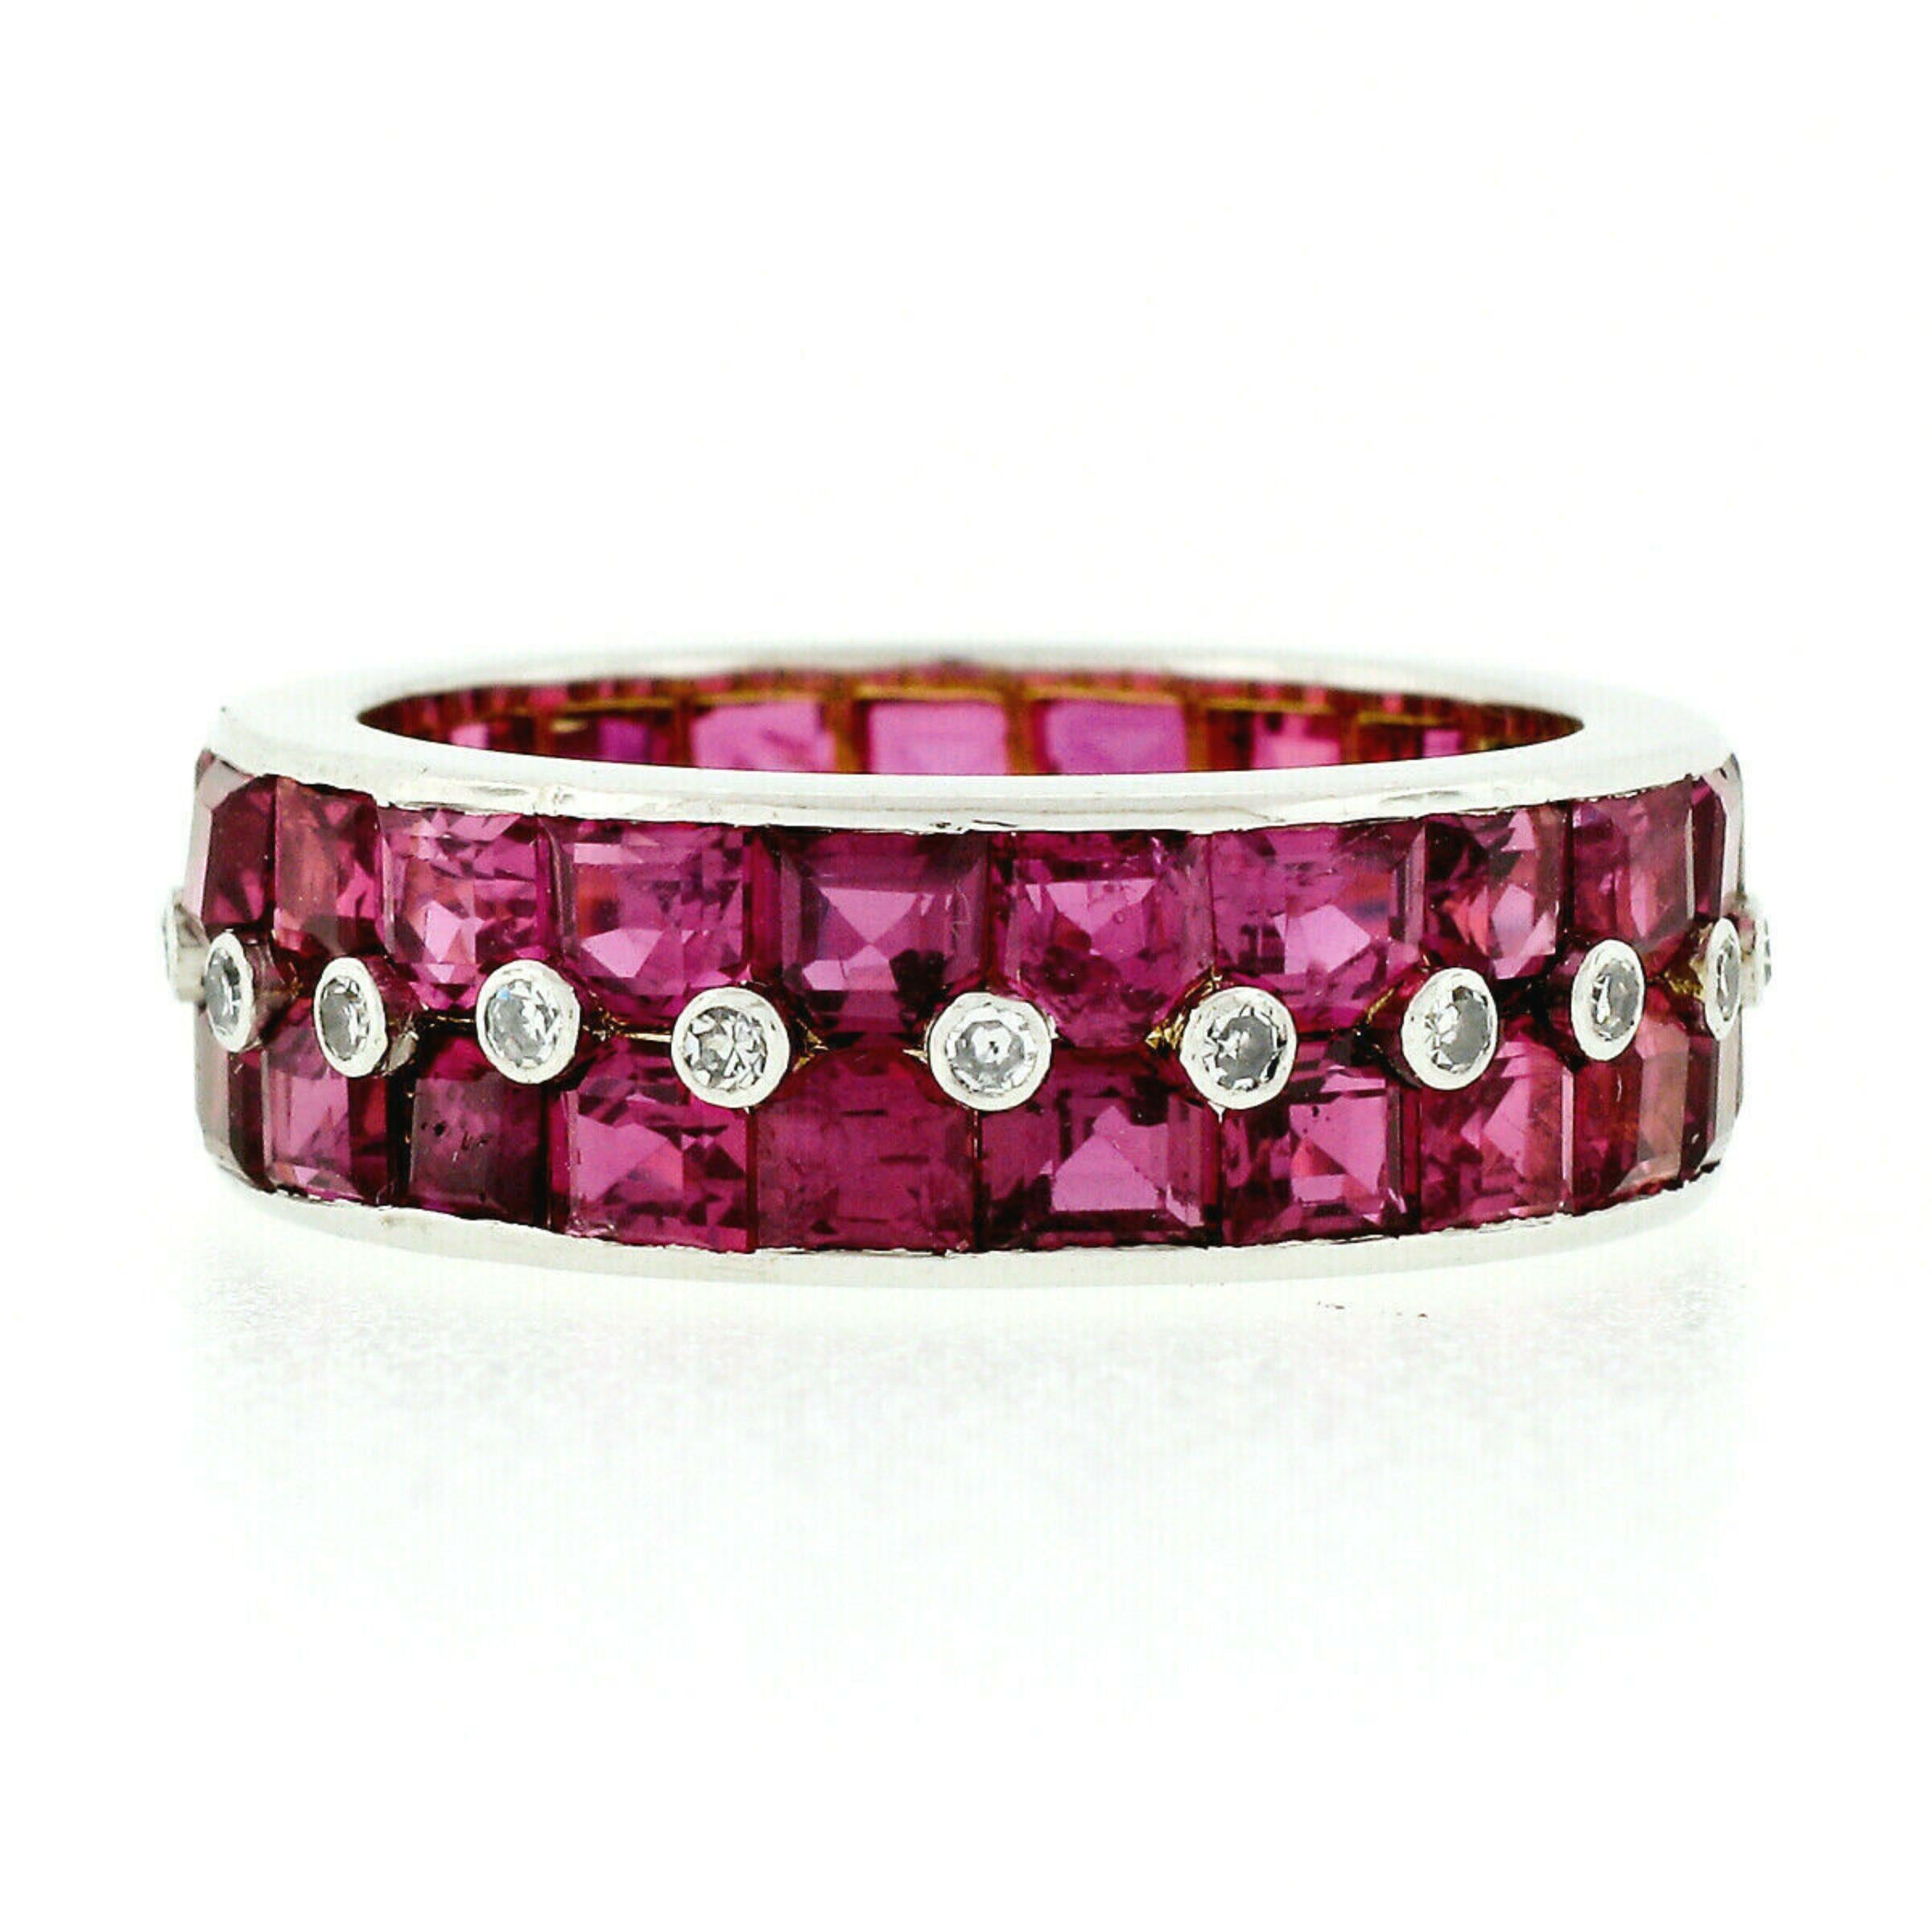 Antique Platinum Channel Square Step Cut Ruby & Diamond Wide Eternity Band Ring 1